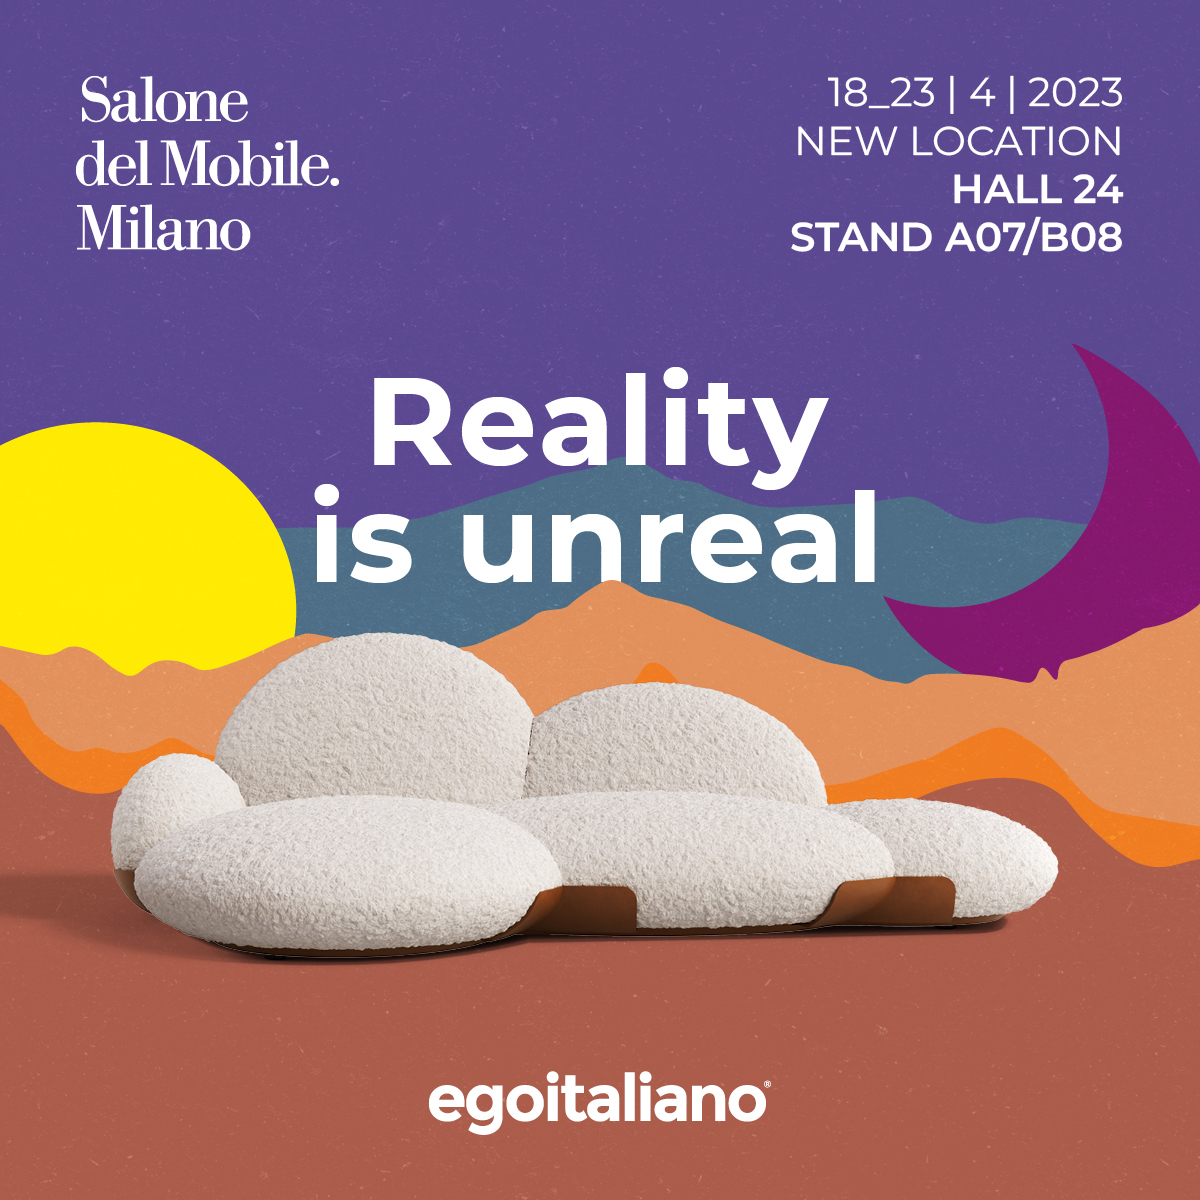 News from Salone del Mobile 2023